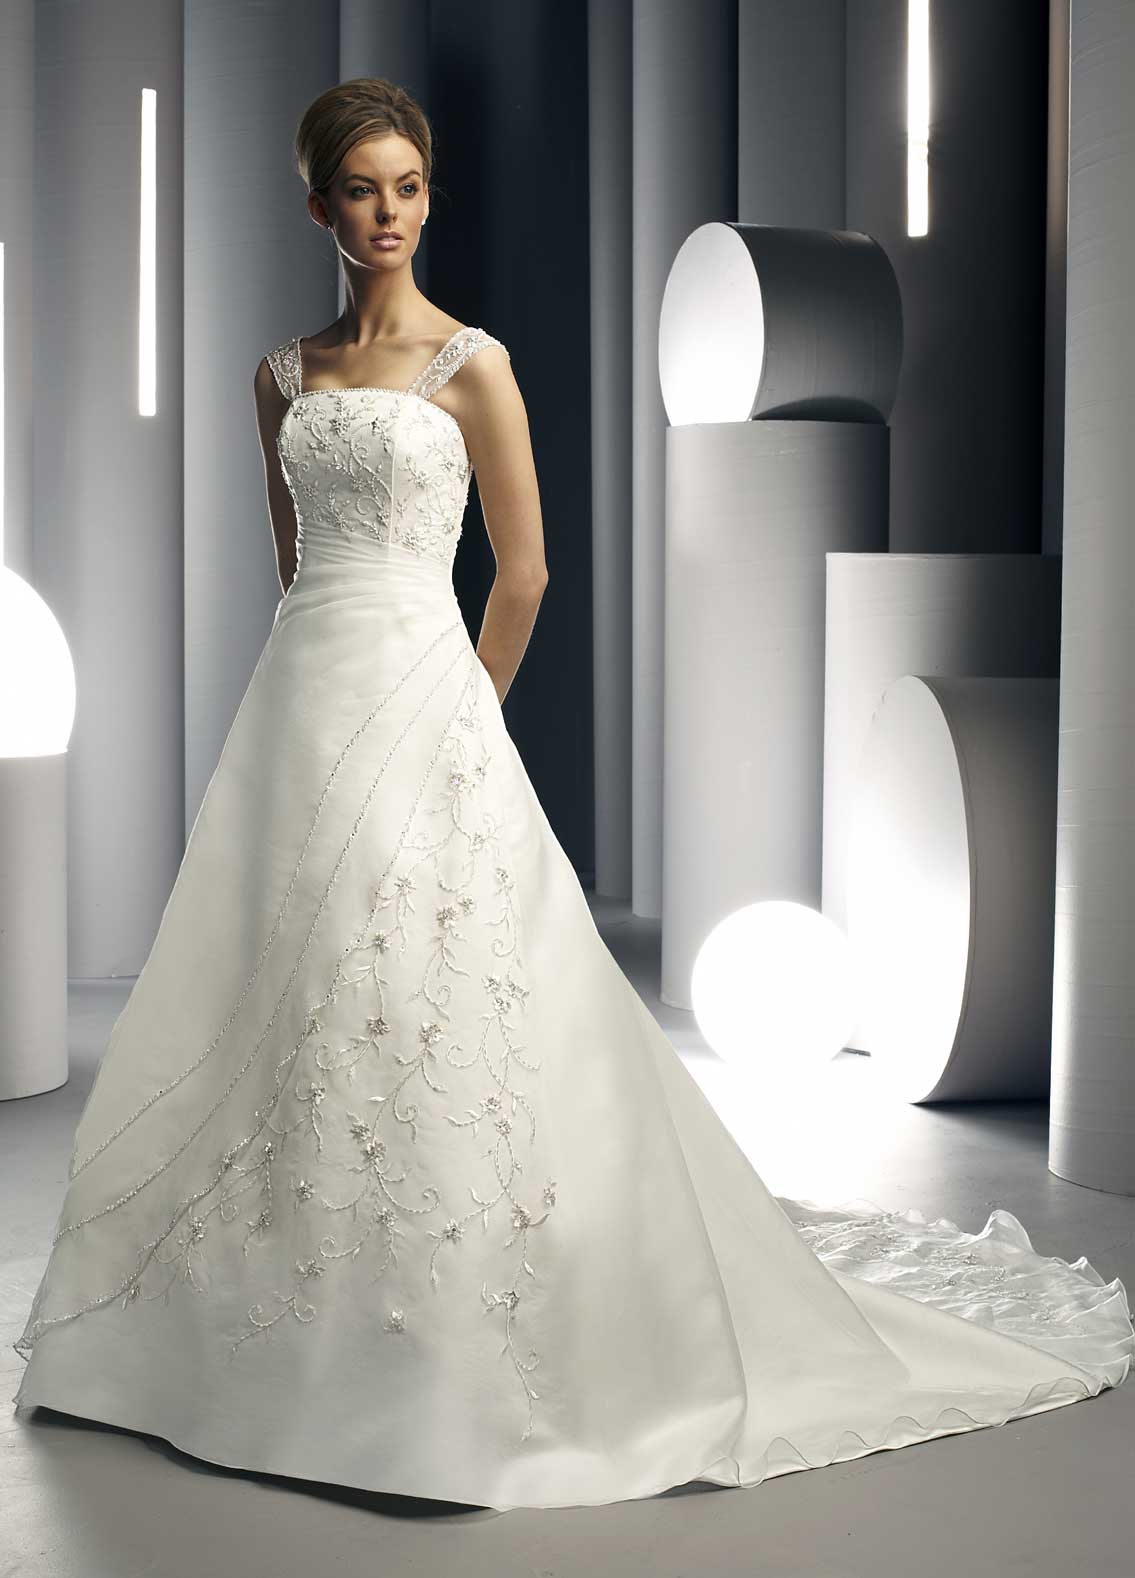 Organza wedding dress with lace shoulder straps 